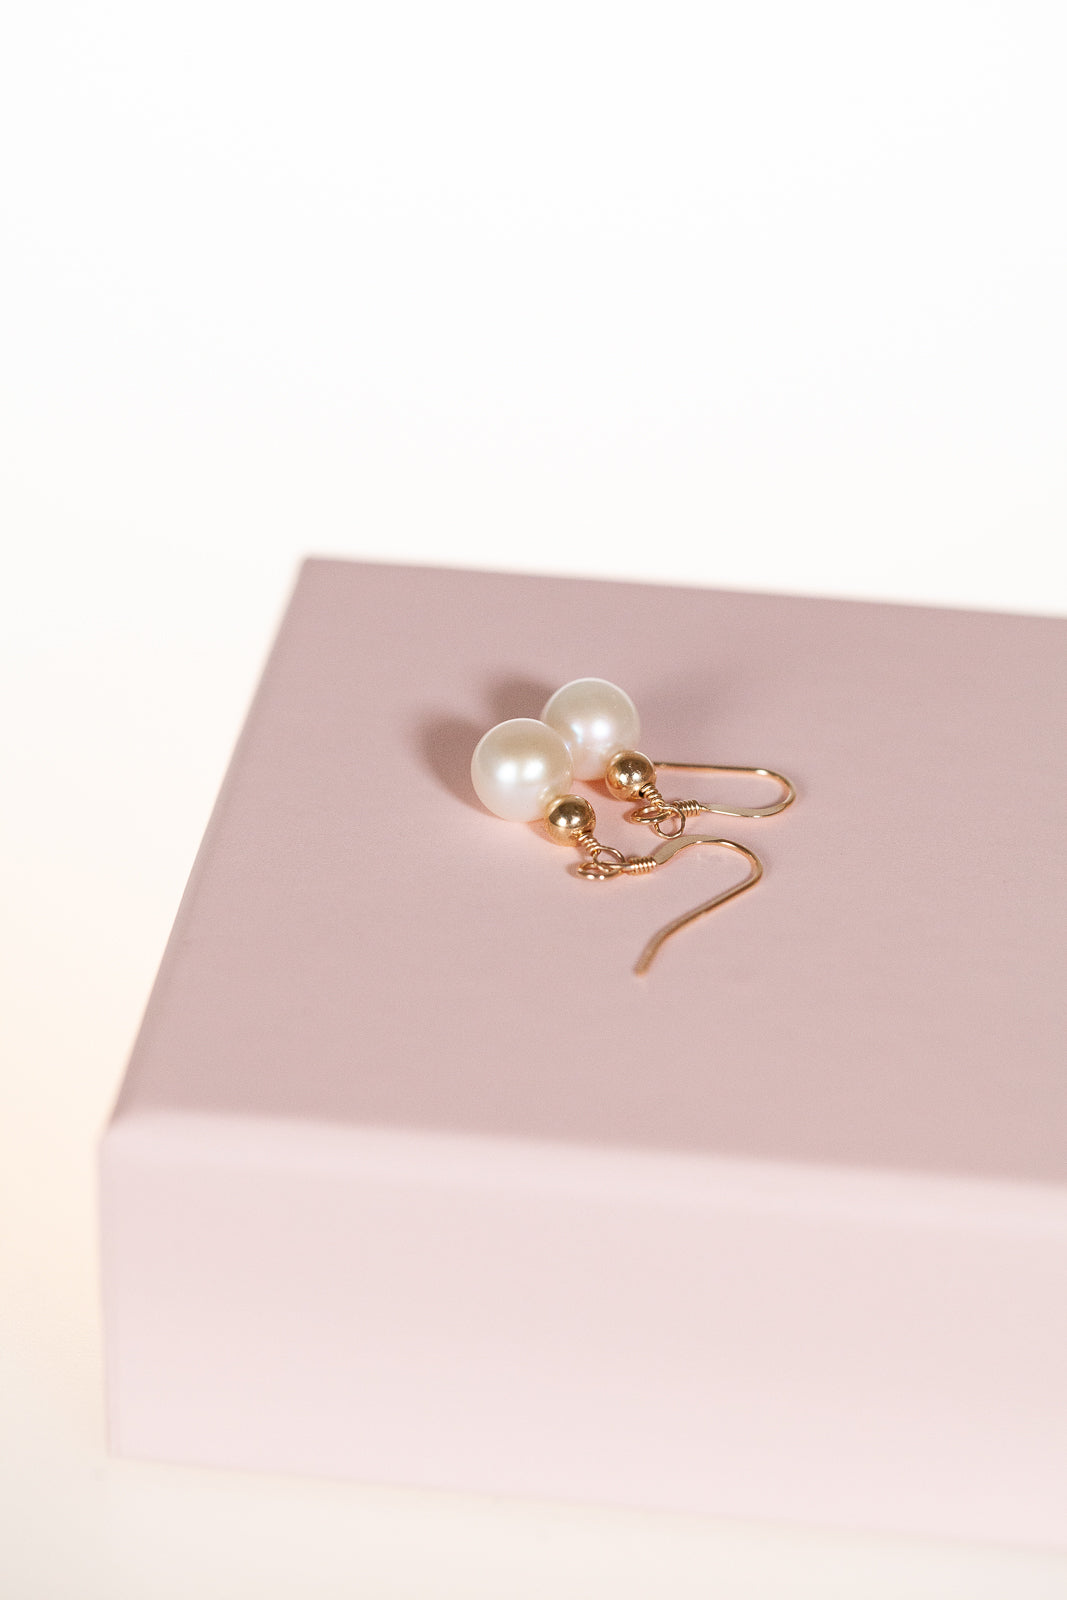 The Pearl Source 8 mm Pink Freshwater Pearl Stud Earrings Review +  Giveaway! - The Mommyhood Chronicles